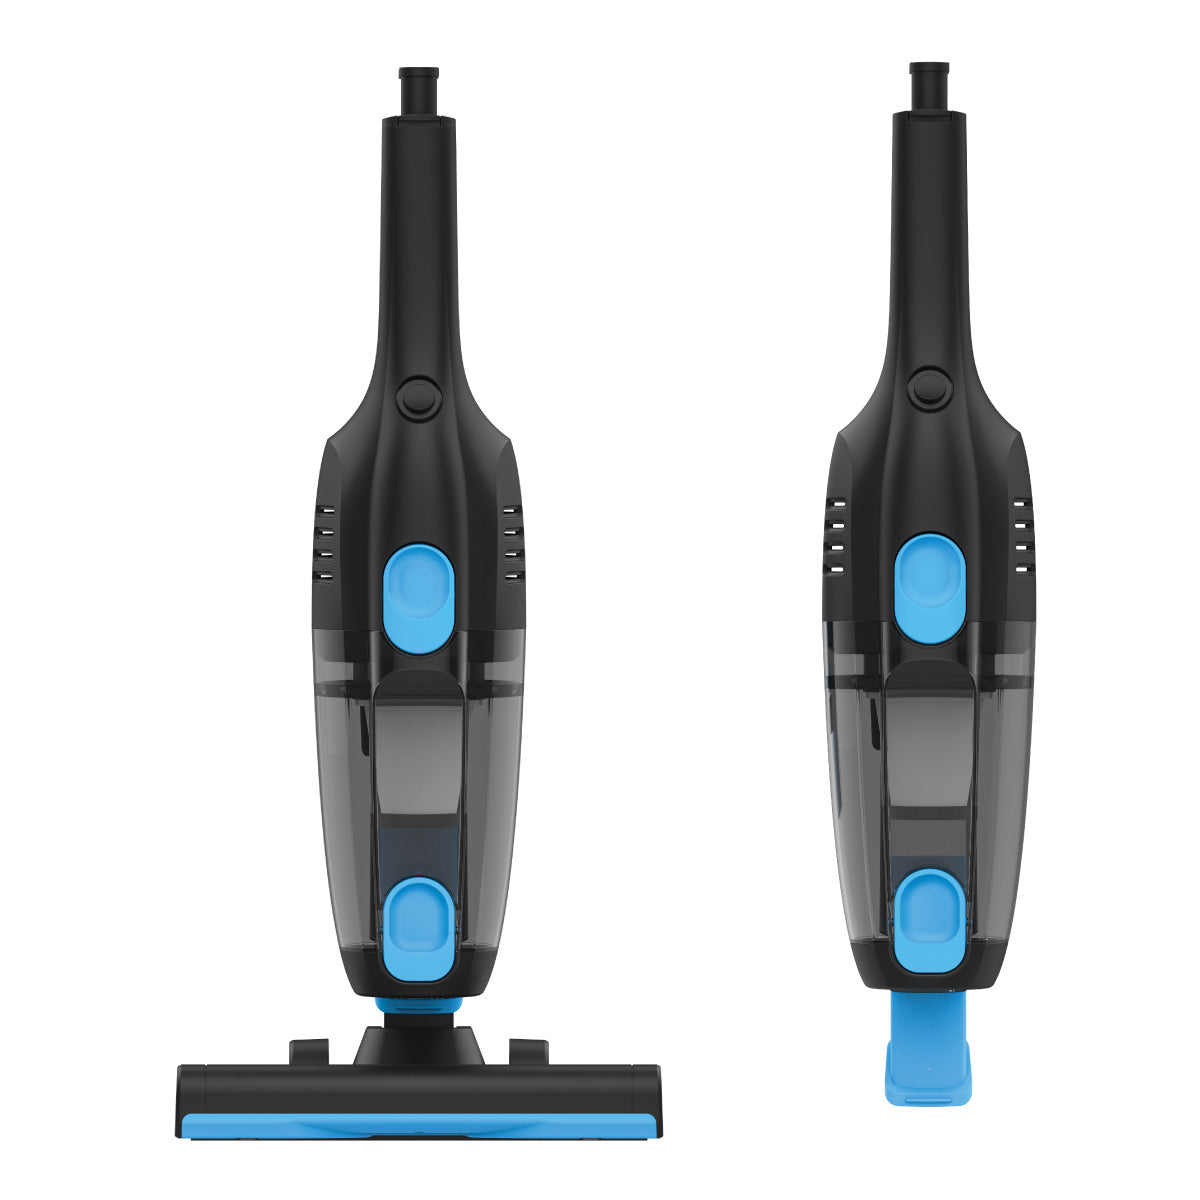 Handheld vacuum cleaner, Stick Vacuum Cleaner, Bagless Vacuum Cleaner with HEPA filter 600 Watts (PPV600A)